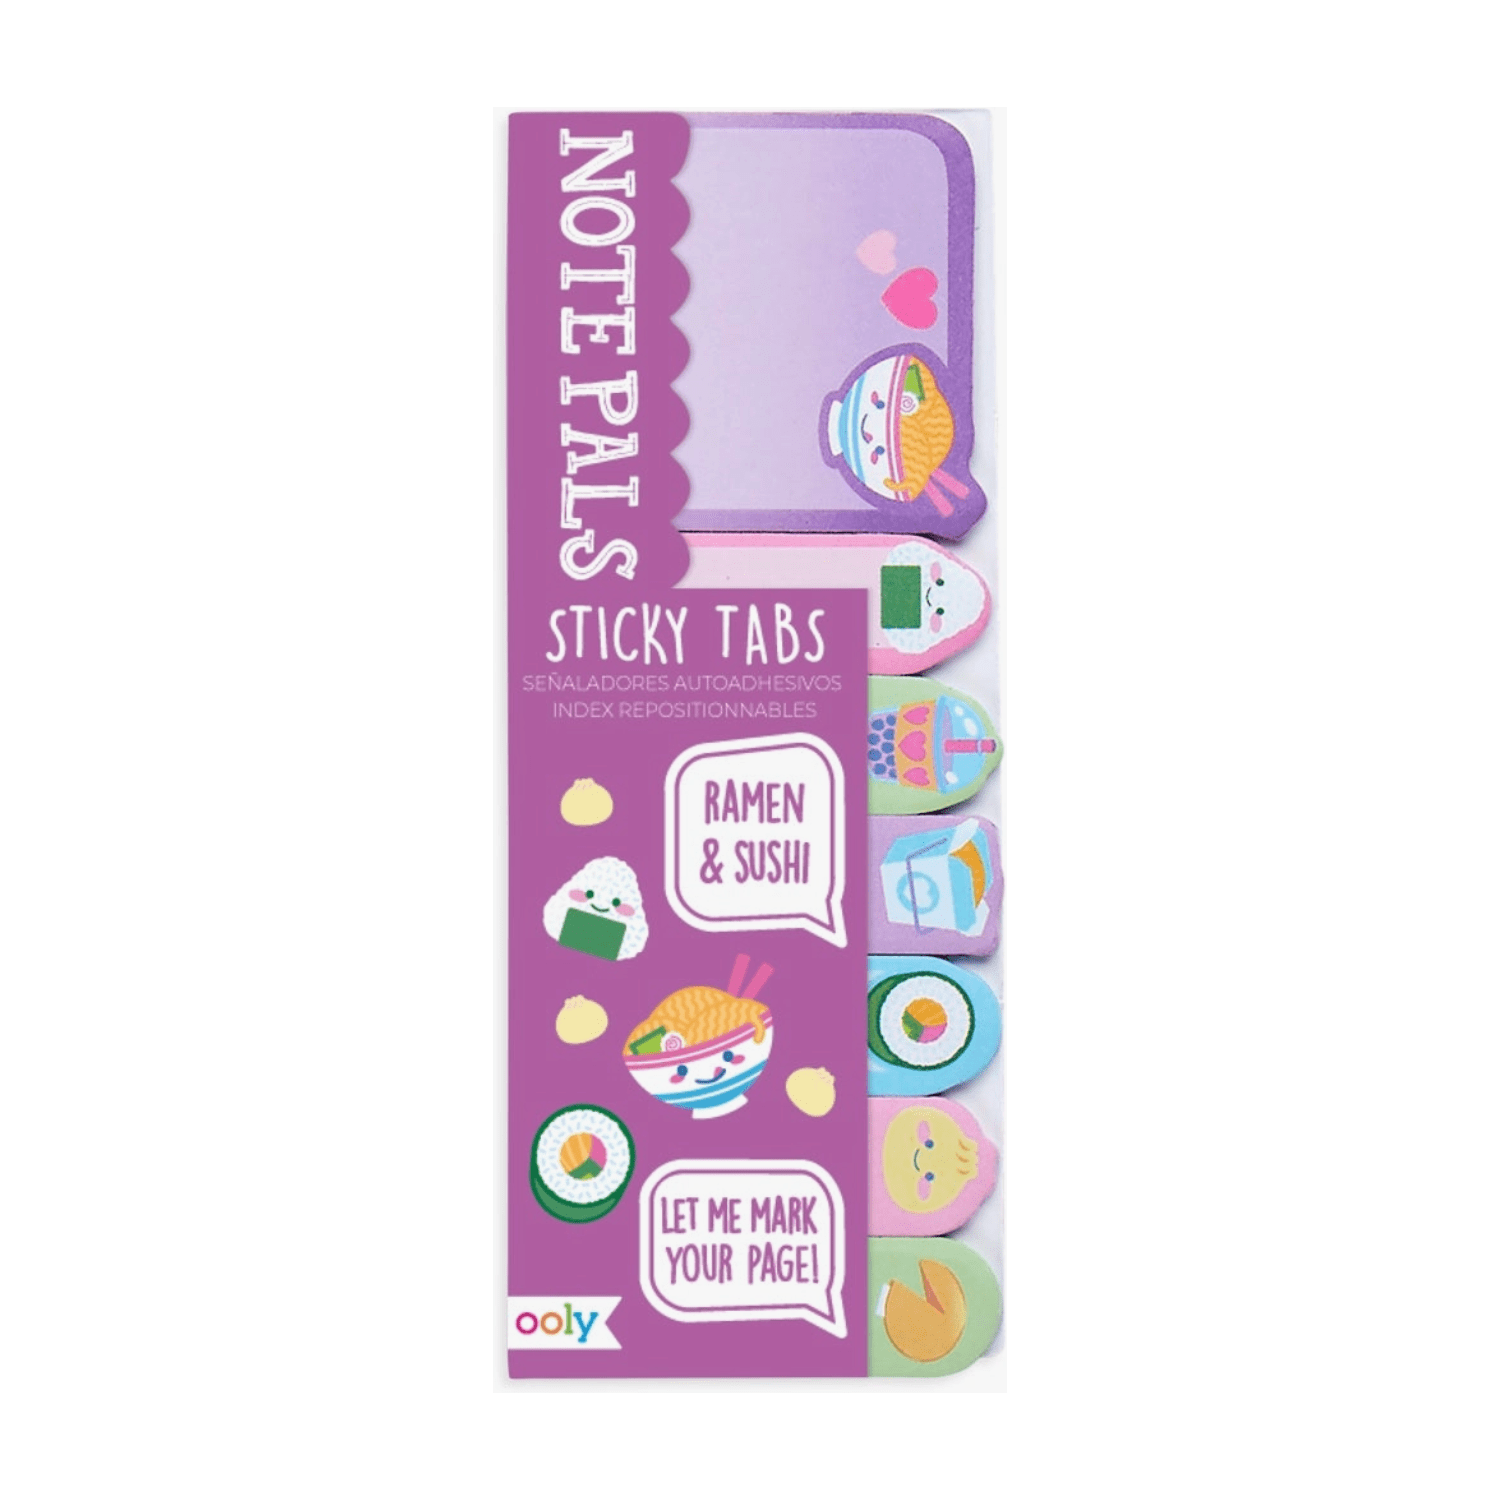 Ooly Note Pads Sticky Tabs- Ramen & Sushi